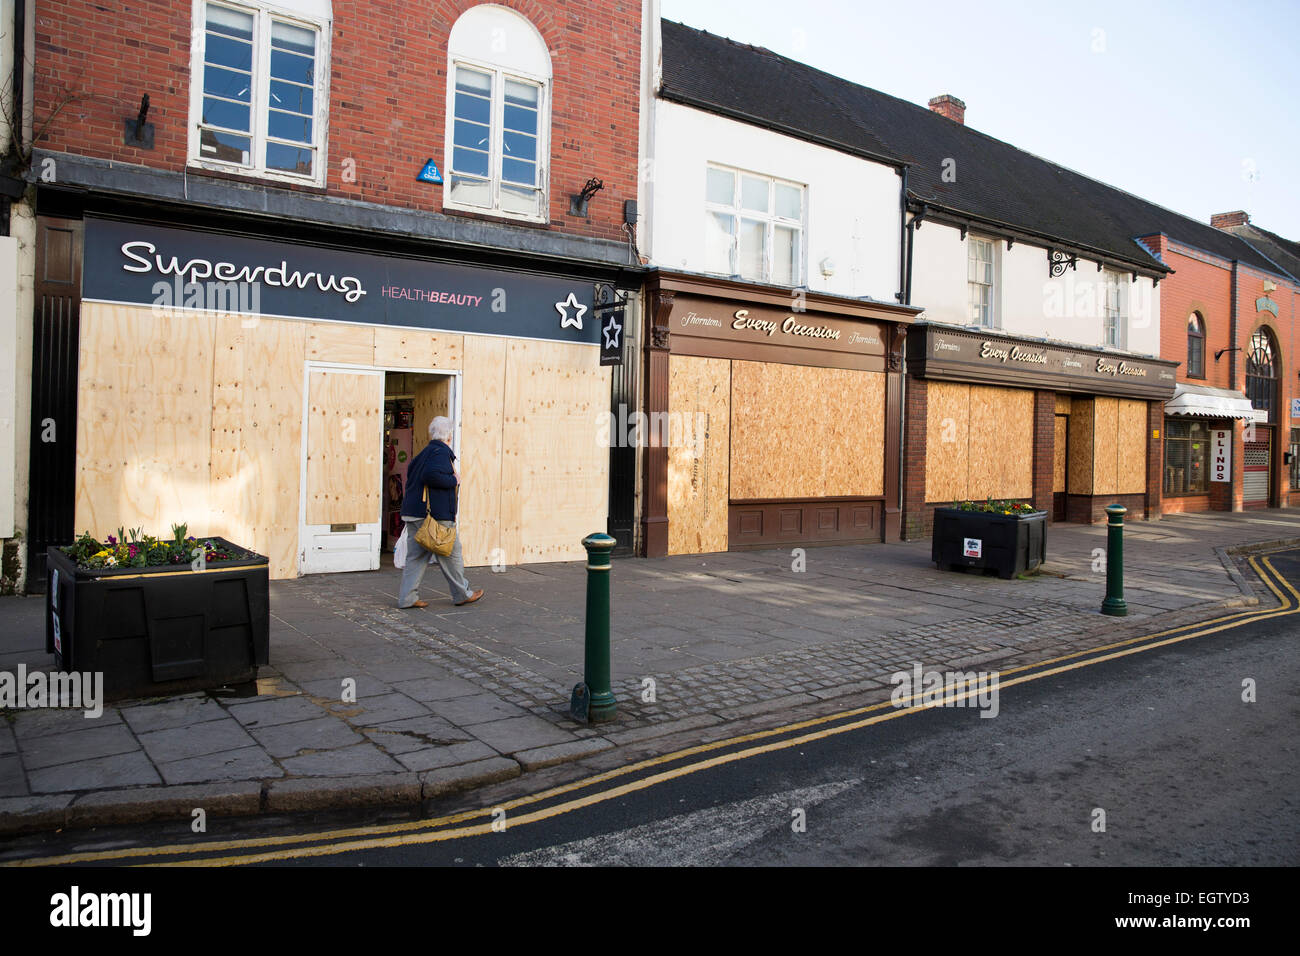 Atherstone Ball Game. Atherstone. Boarded up shops in Long Street before the game takes place. Stock Photo